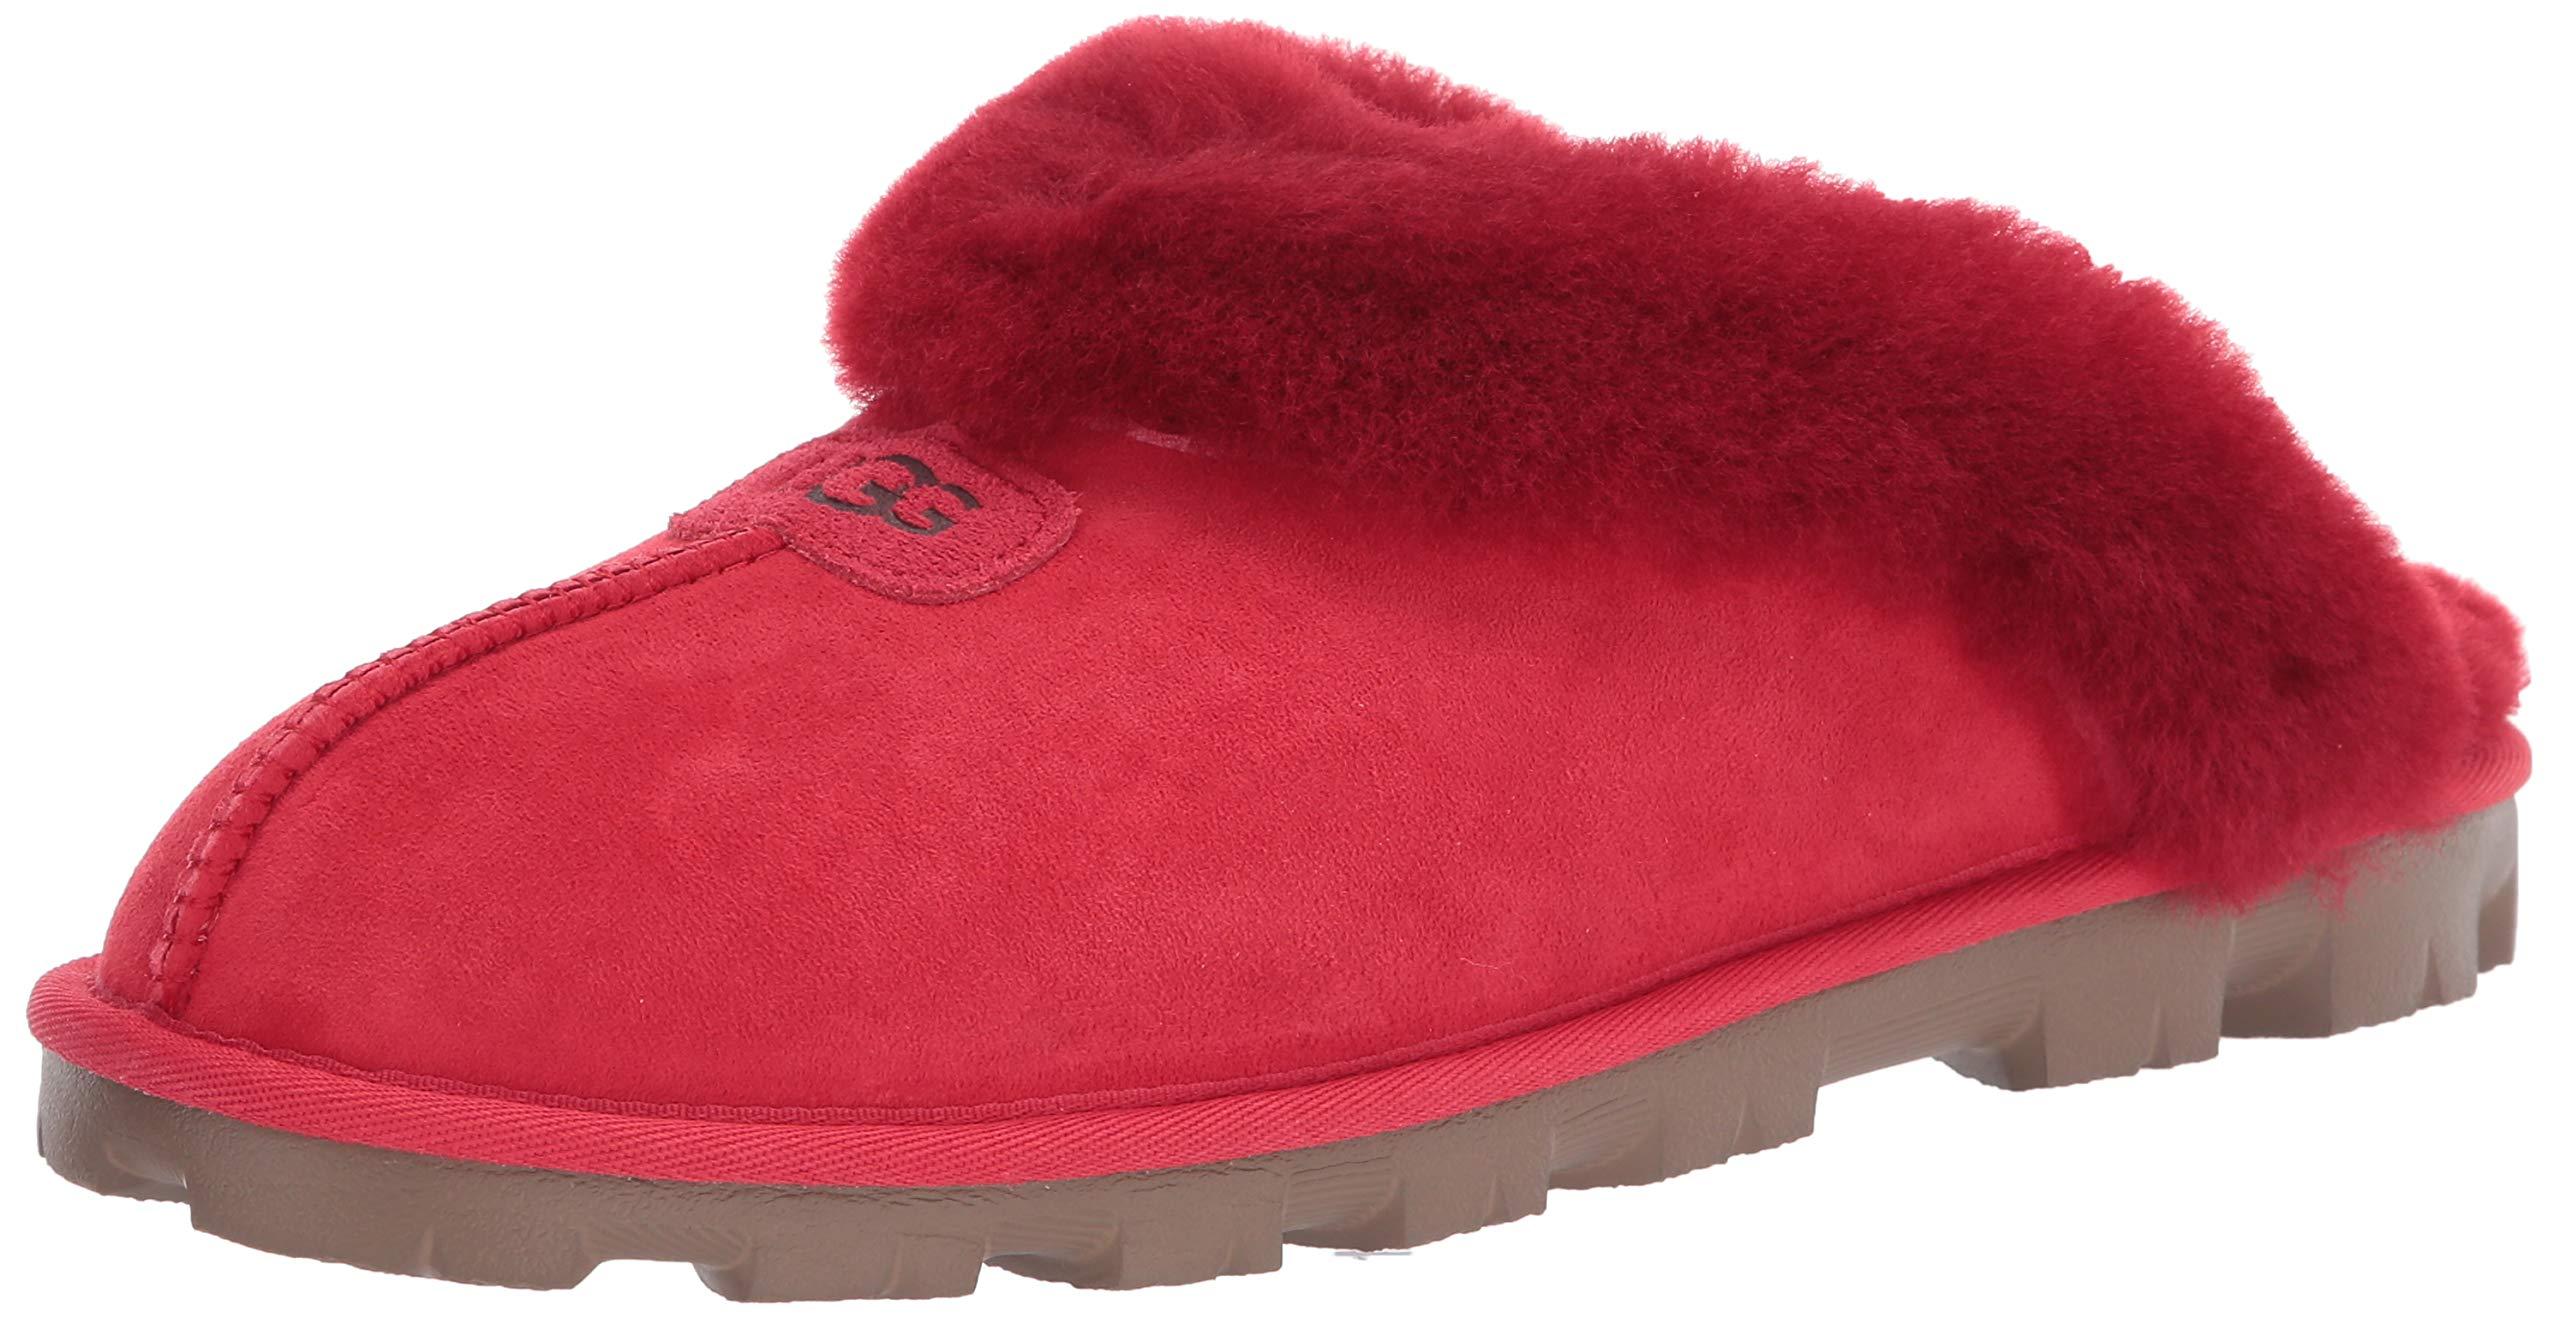 Buy > red uggs slippers womens > in stock